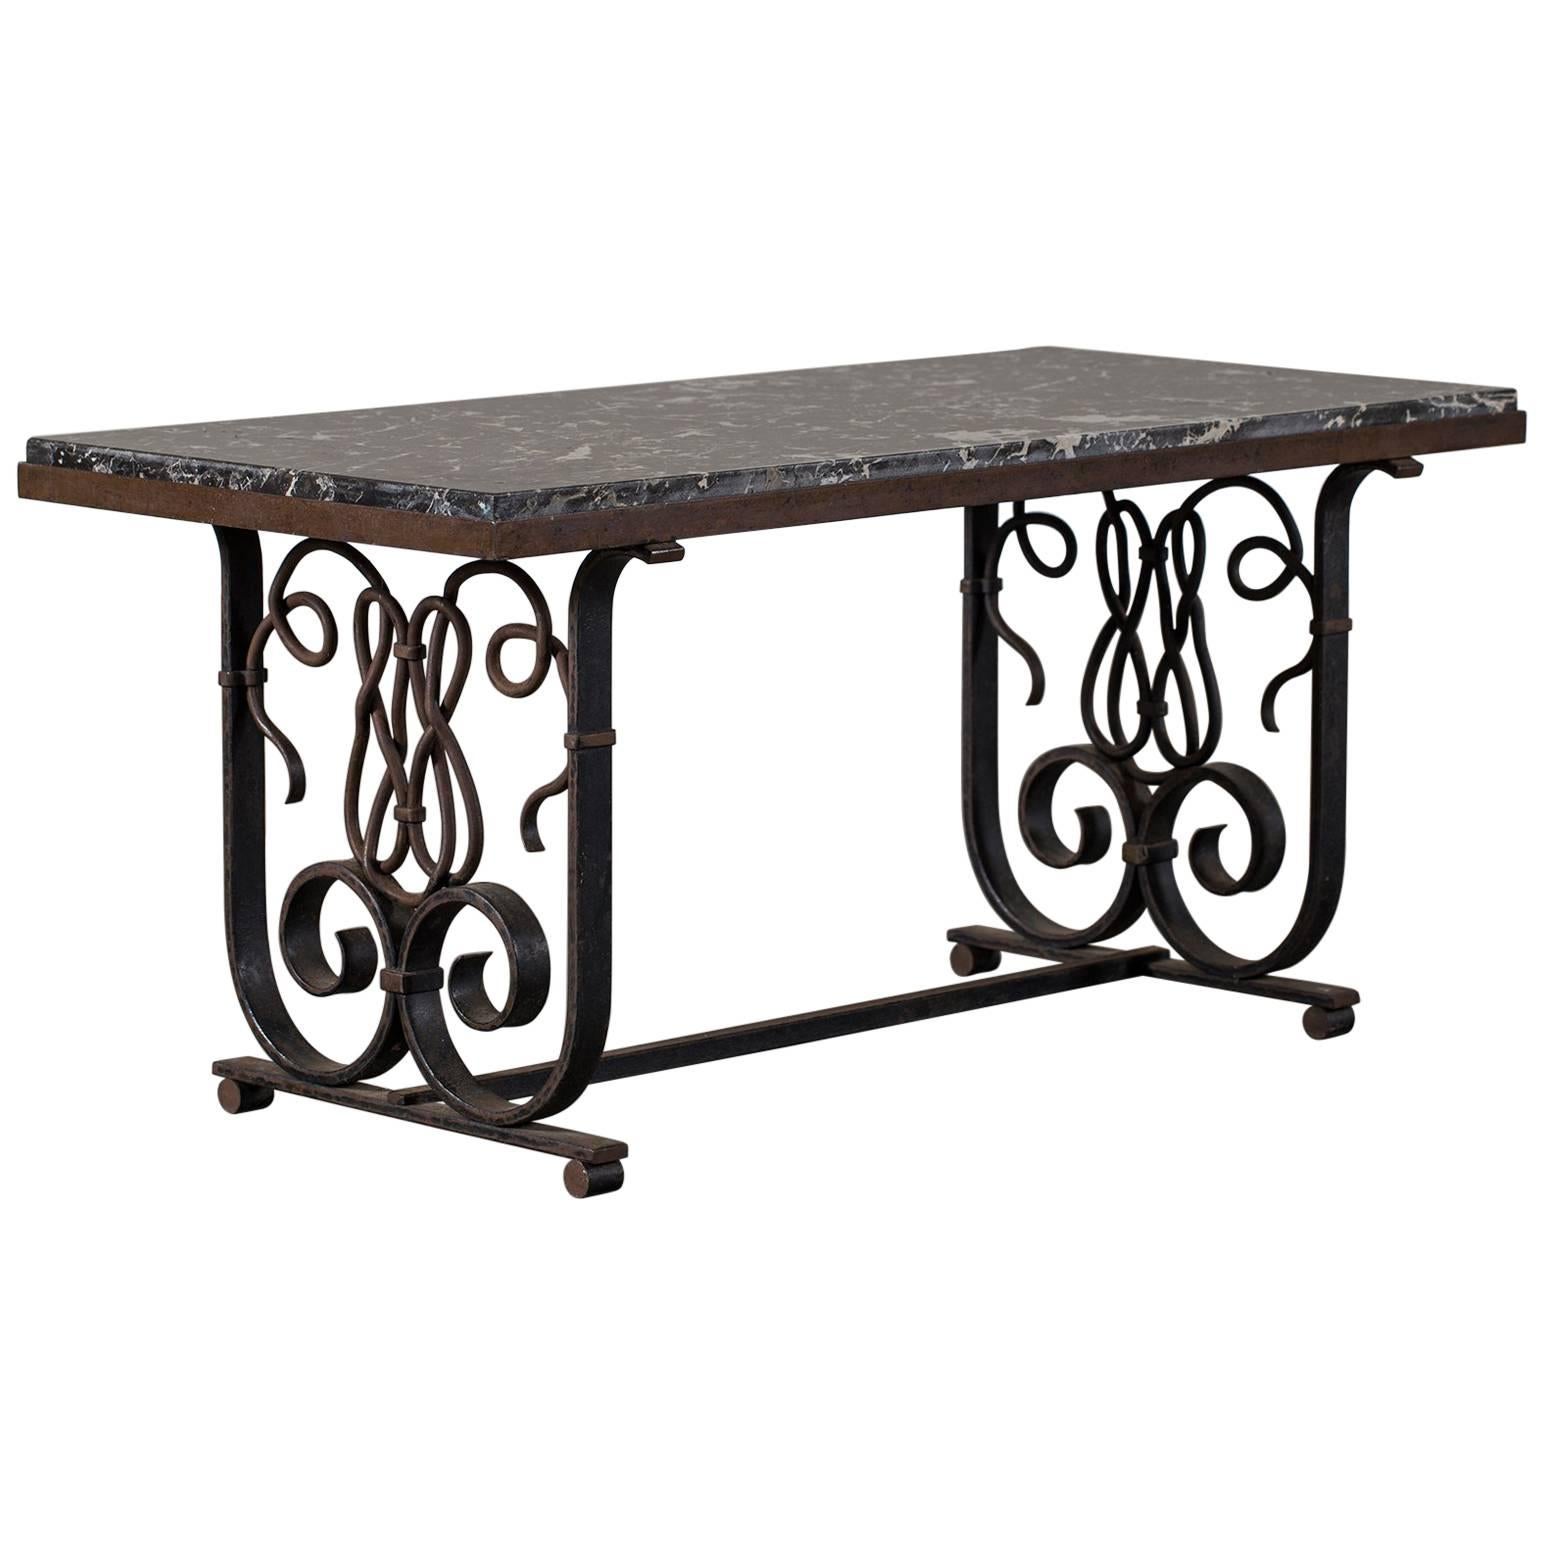 Vintage French Art Nouveau Iron and Marble Coffee Table, circa 1920